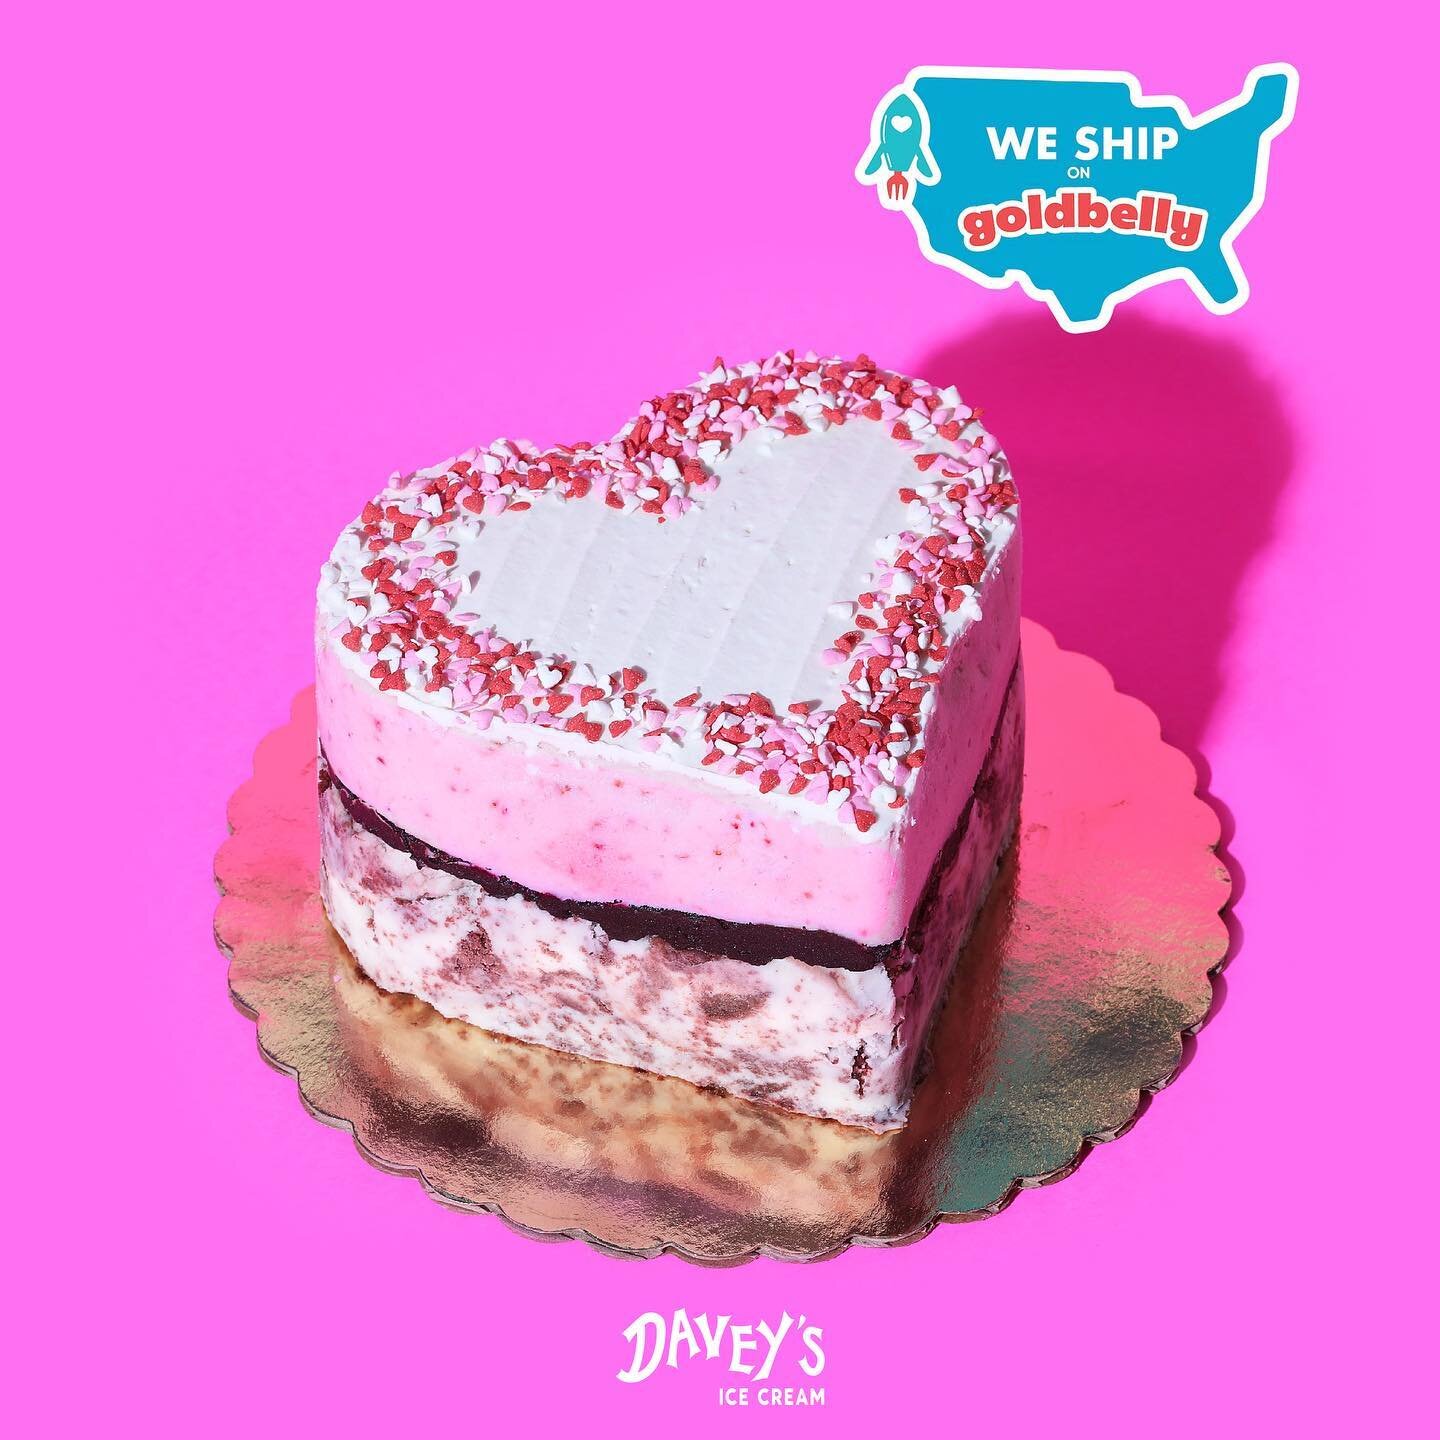 💗 Davey&rsquo;s Valentine&rsquo;s Ice Cream Cakes 💗 Delivering nationwide via @goldbelly! 🔒 Pre-orders LOCK next Wednesday, Feb. 8 @ 7am sharp!! 🔒 Link in bio &amp; story.
&ndash;
👉 Layers of Homemade Fresh Strawberry &amp; Red Velvet Ice Cream 